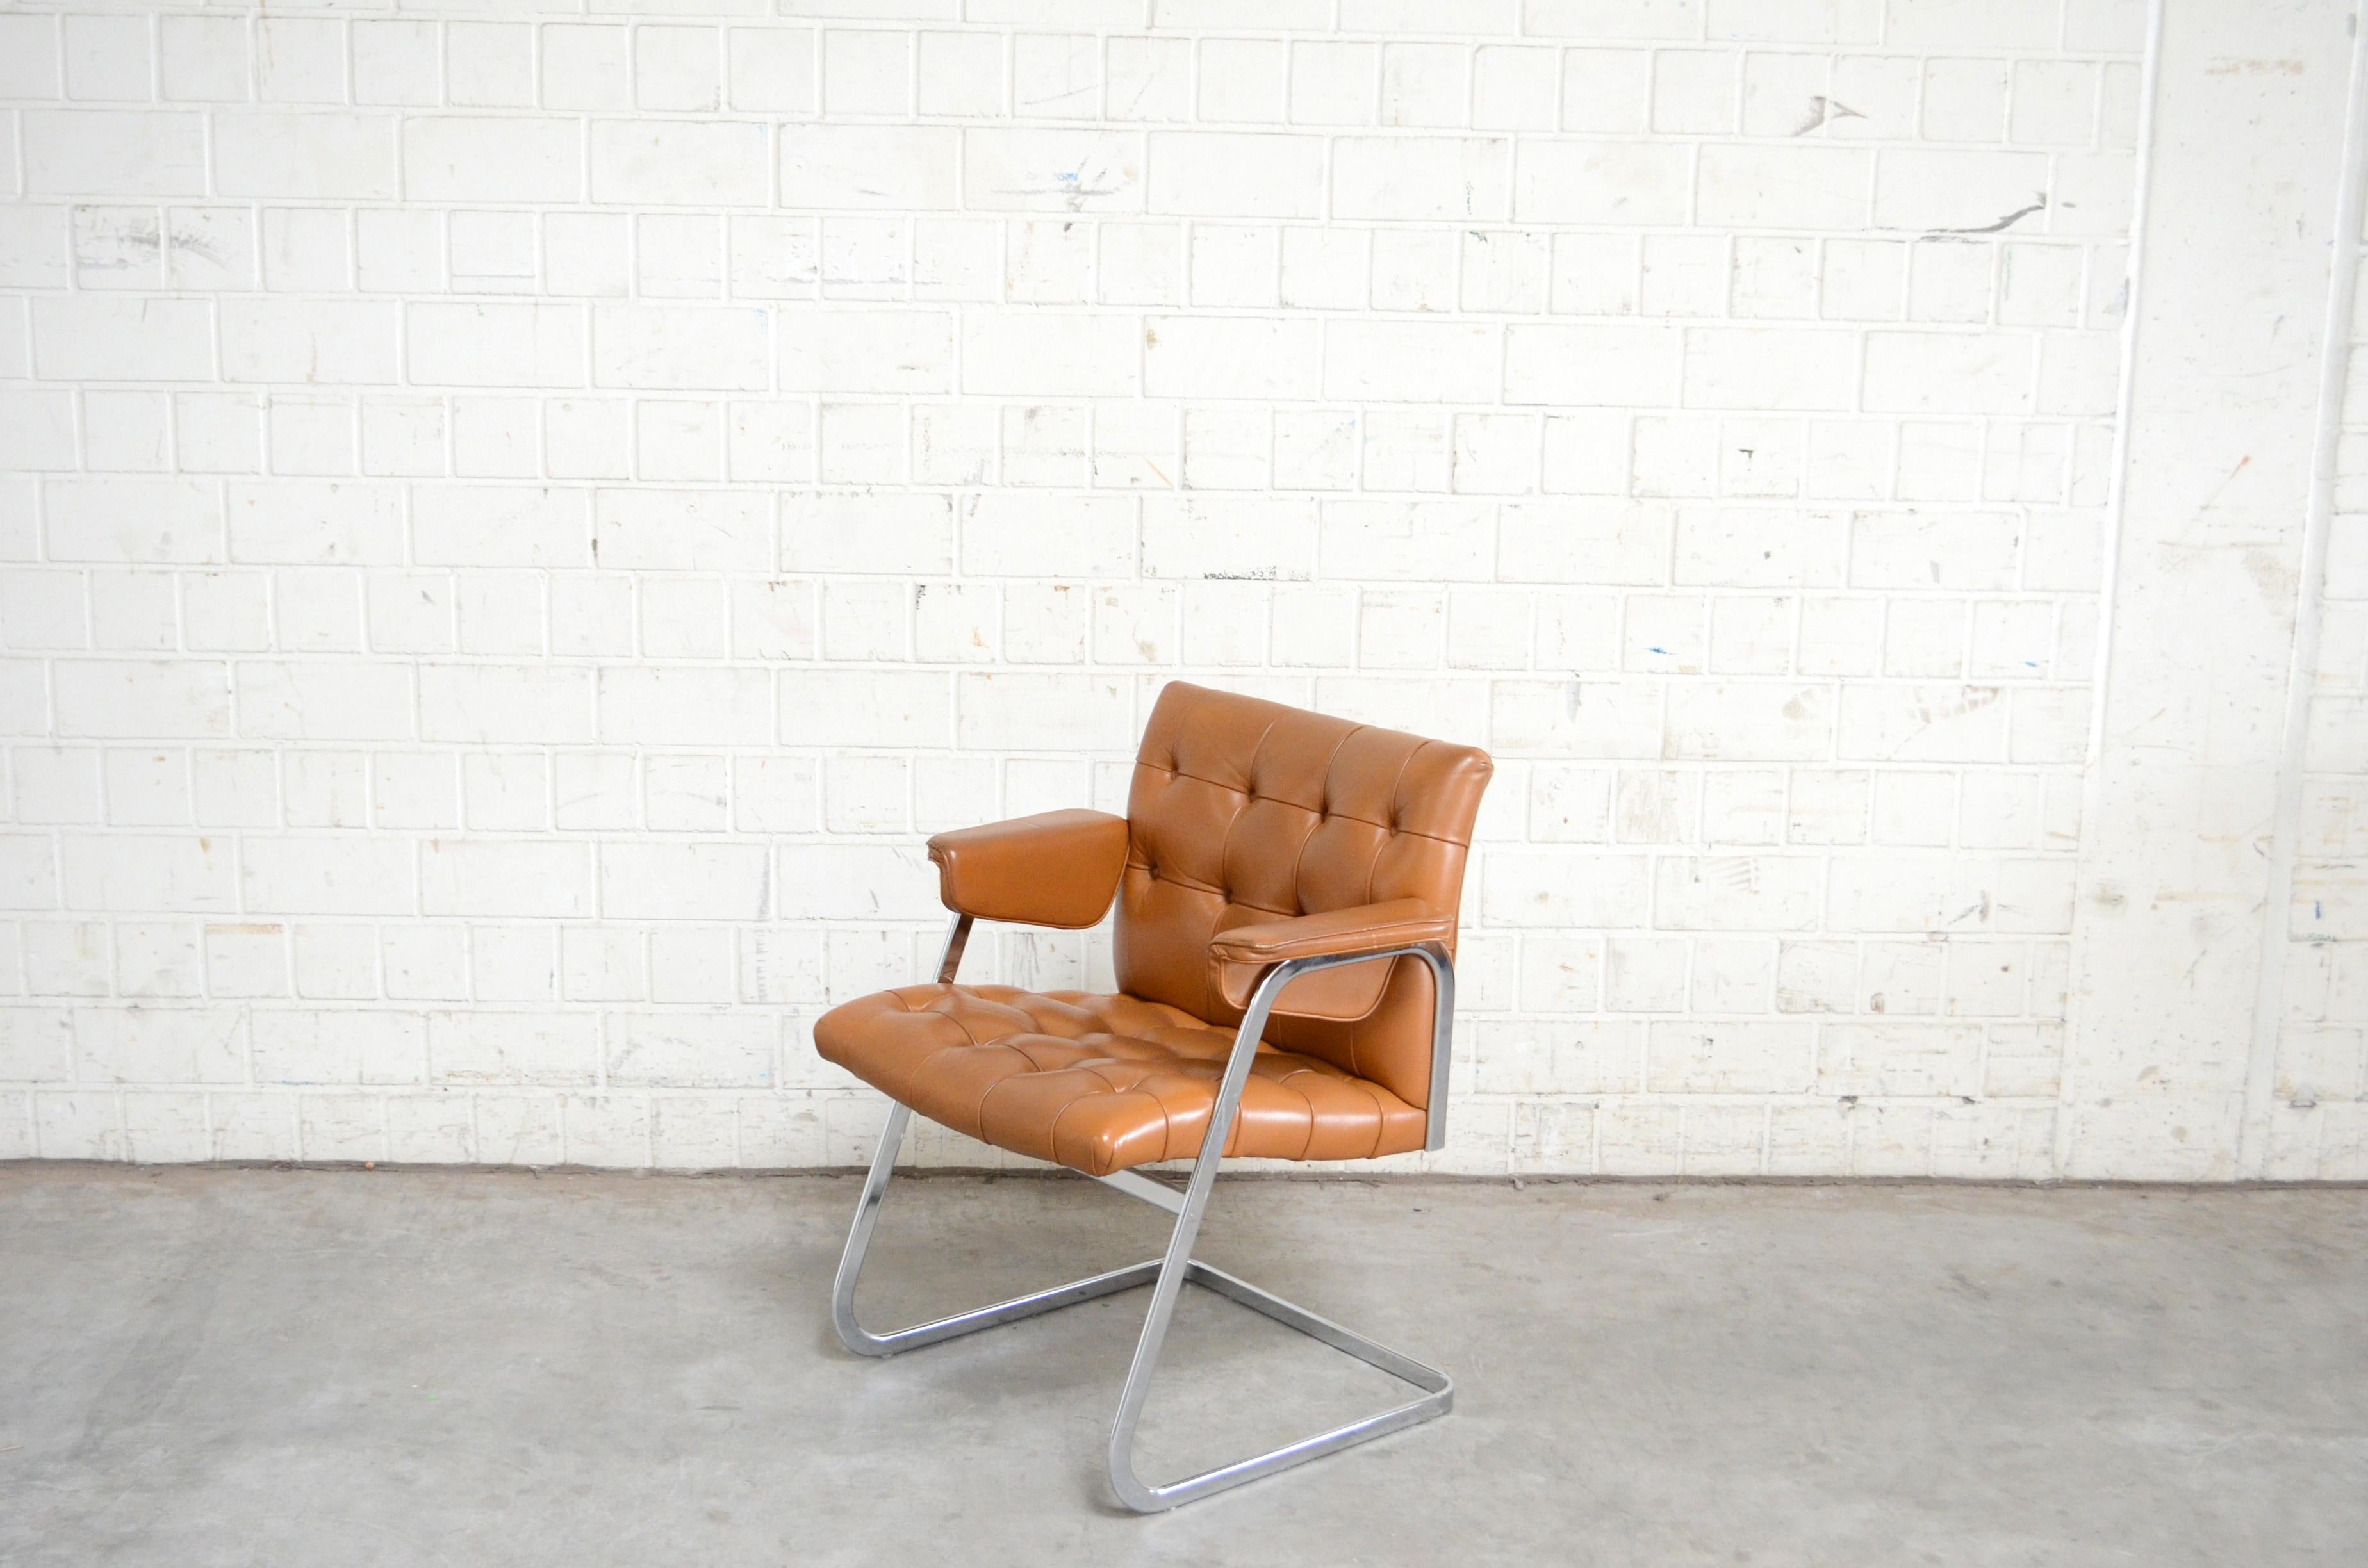 Robert Haussmann RH 305 armchairs design of 1957 and manufactured by De Sede.
Brandy cognac leather. The leather was recoloured some years ago from a leather company.
This version from 1970s is very rare version with Softpad armrests.
The design